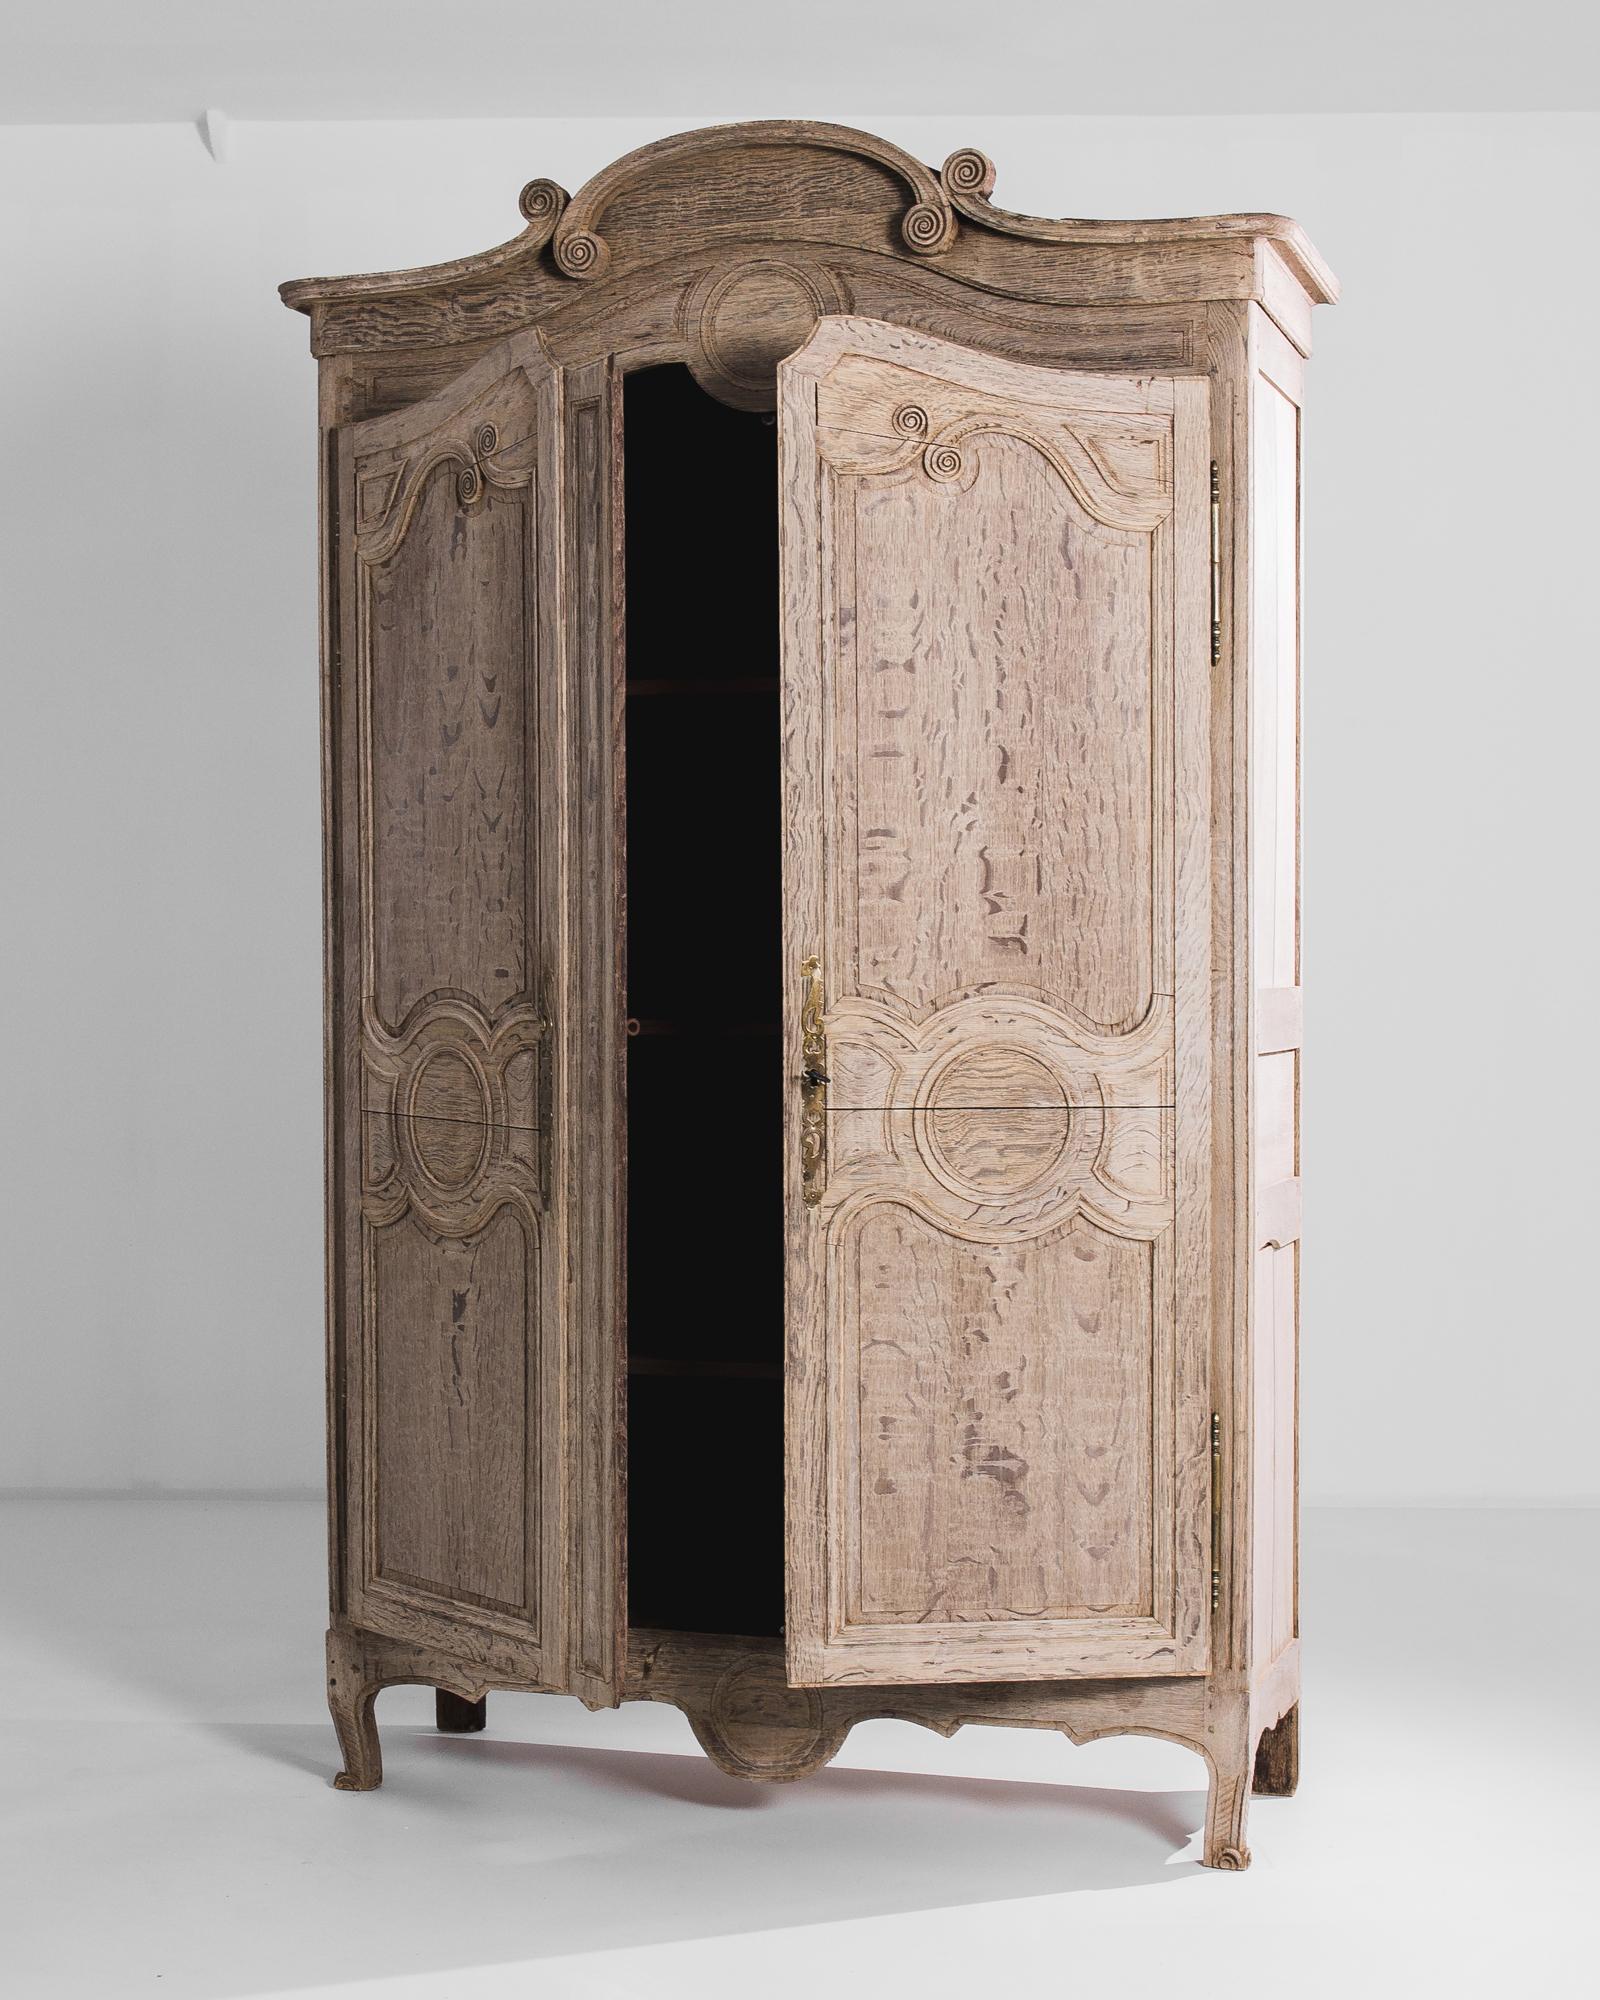 Stepping into the refined interiors of 19th-century France, this bleached oak armoire from the 1840s exudes the elegance and sophistication of the era. Crafted with exquisite attention to detail, this piece represents the epitome of French